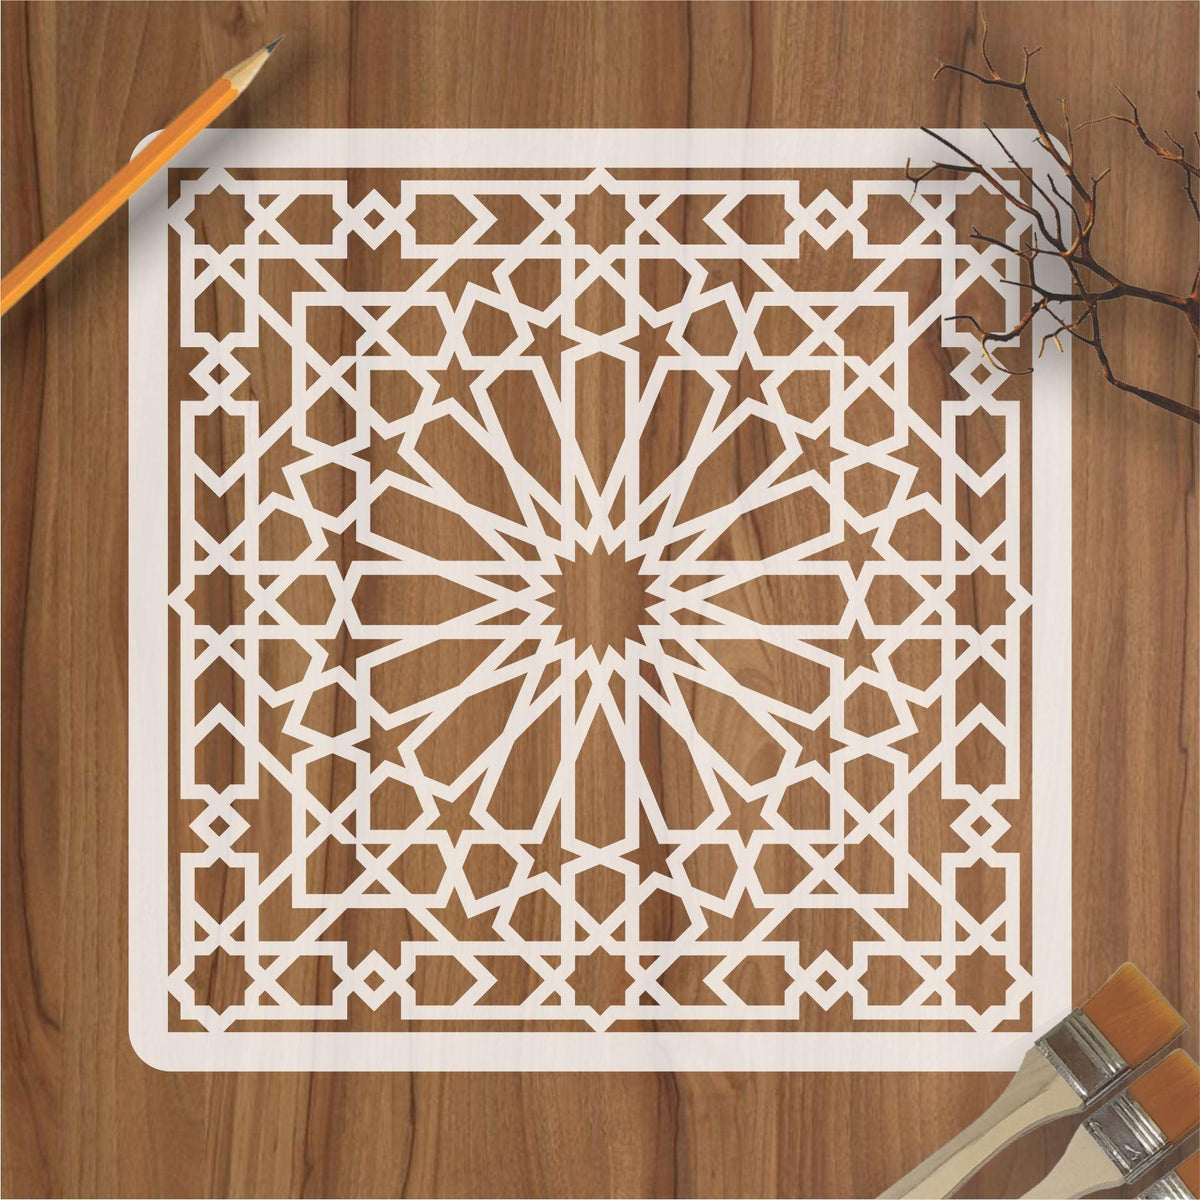 12 Pack Geometric Stencils 12 Inches Reusable Art Templates